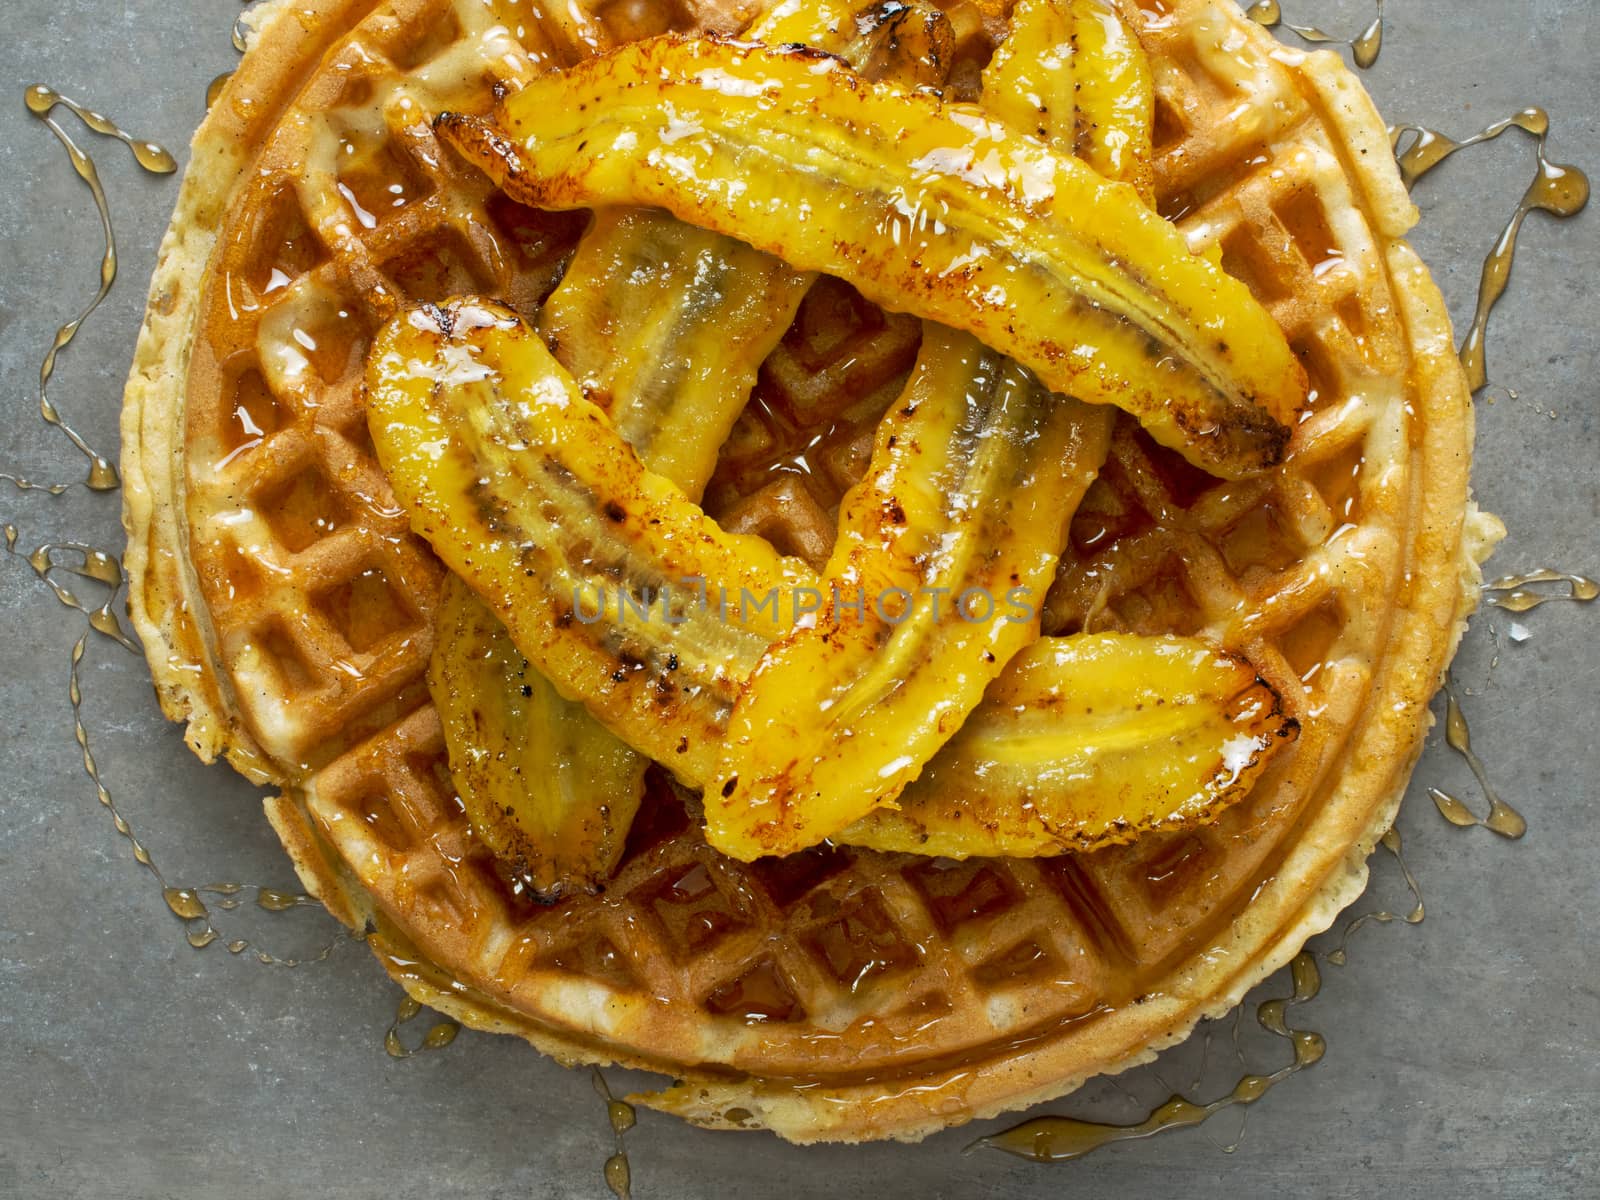 rustic sweet banana waffle with syrup by zkruger